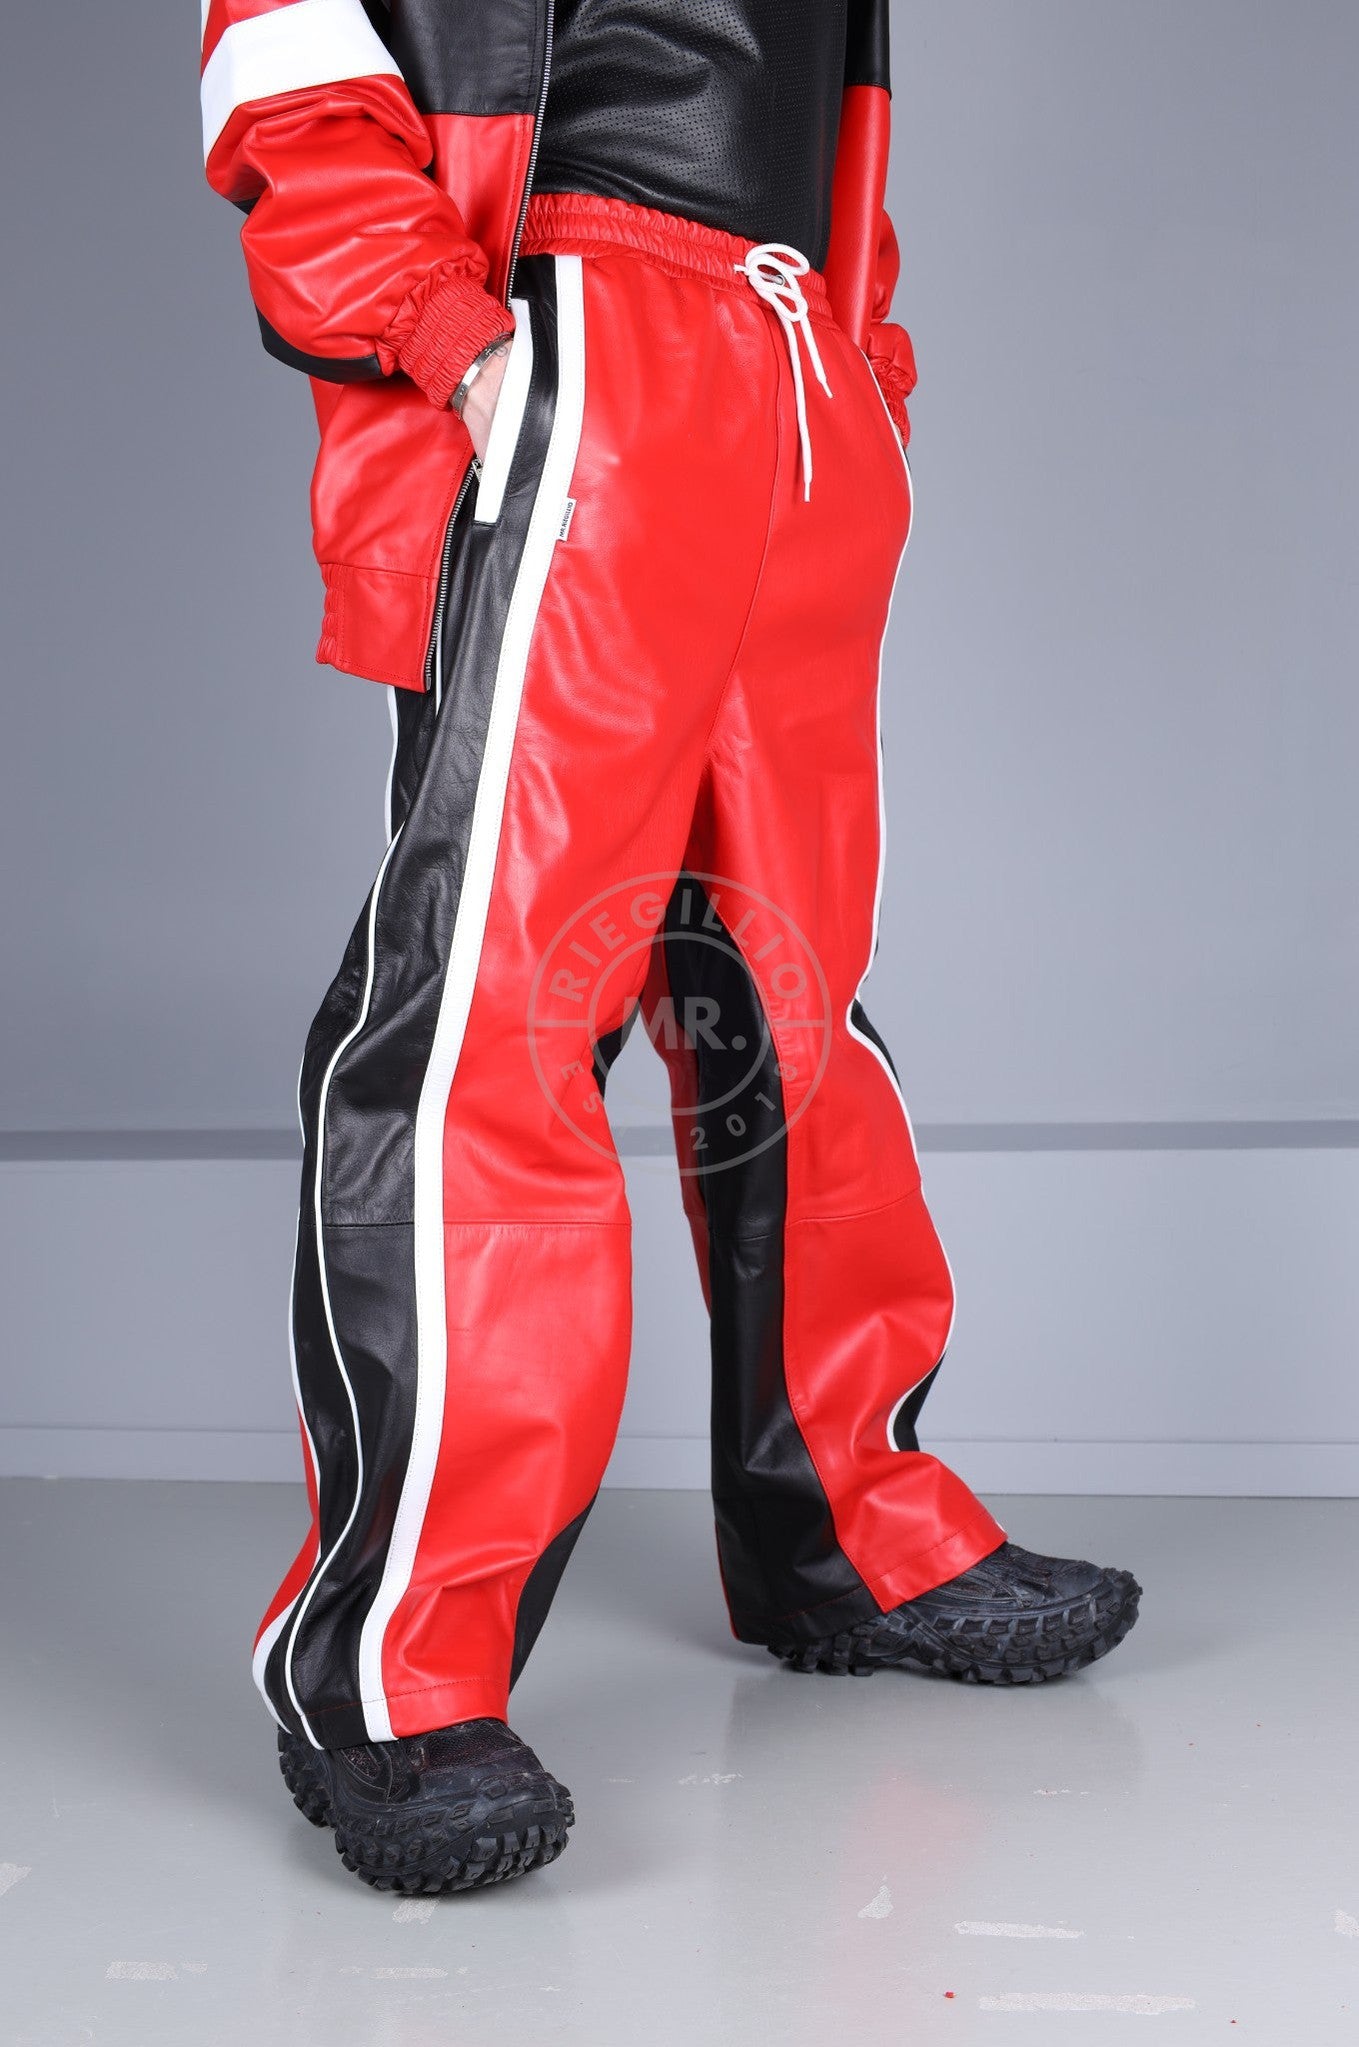 Xtreme Long & Loose Leather Tracksuit Pants at MR. Riegillio